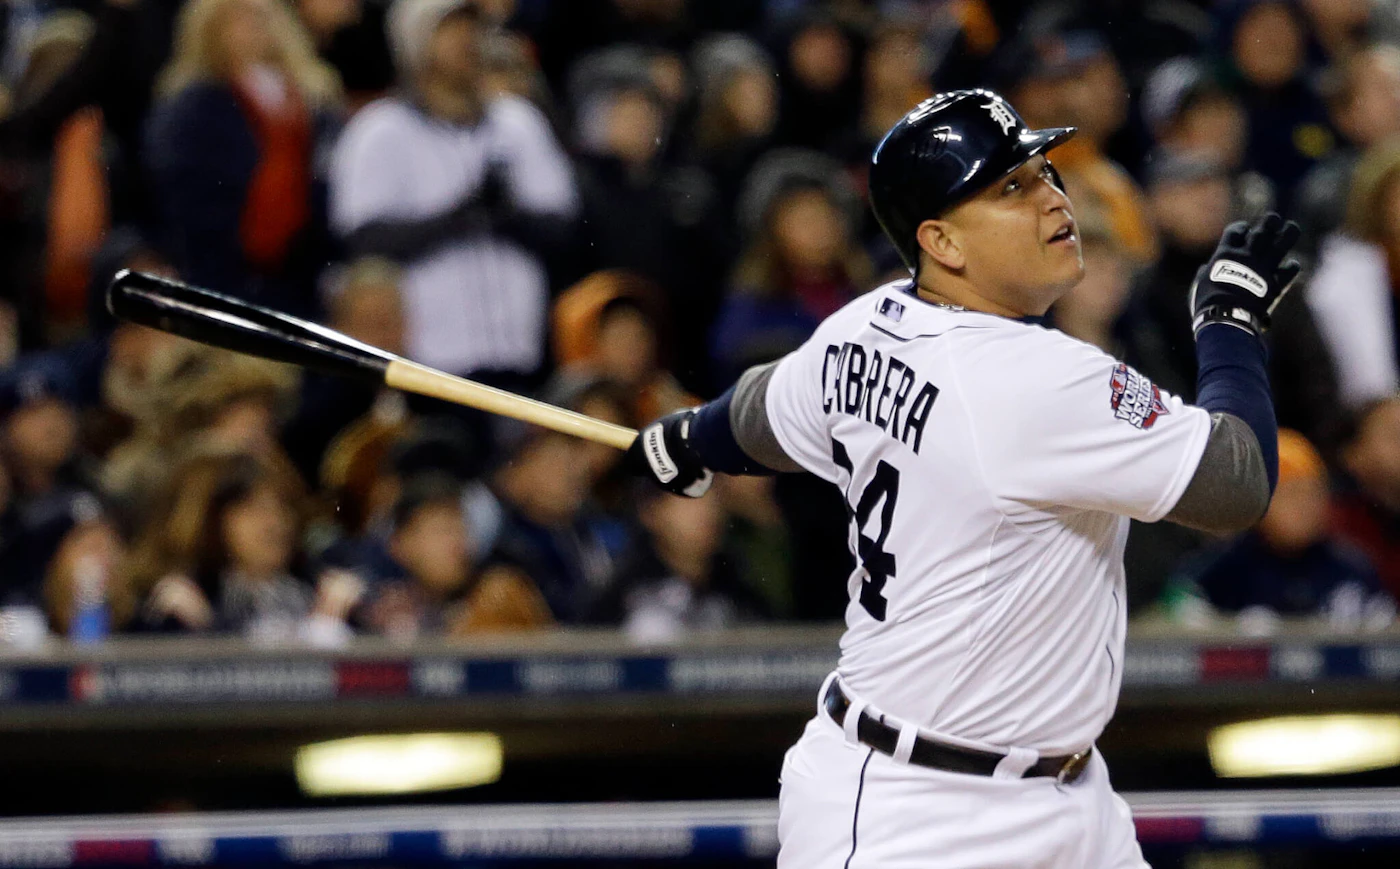 Miguel Cabrera's Career Coming to Close With Tigers, Leaving Lasting Legacy